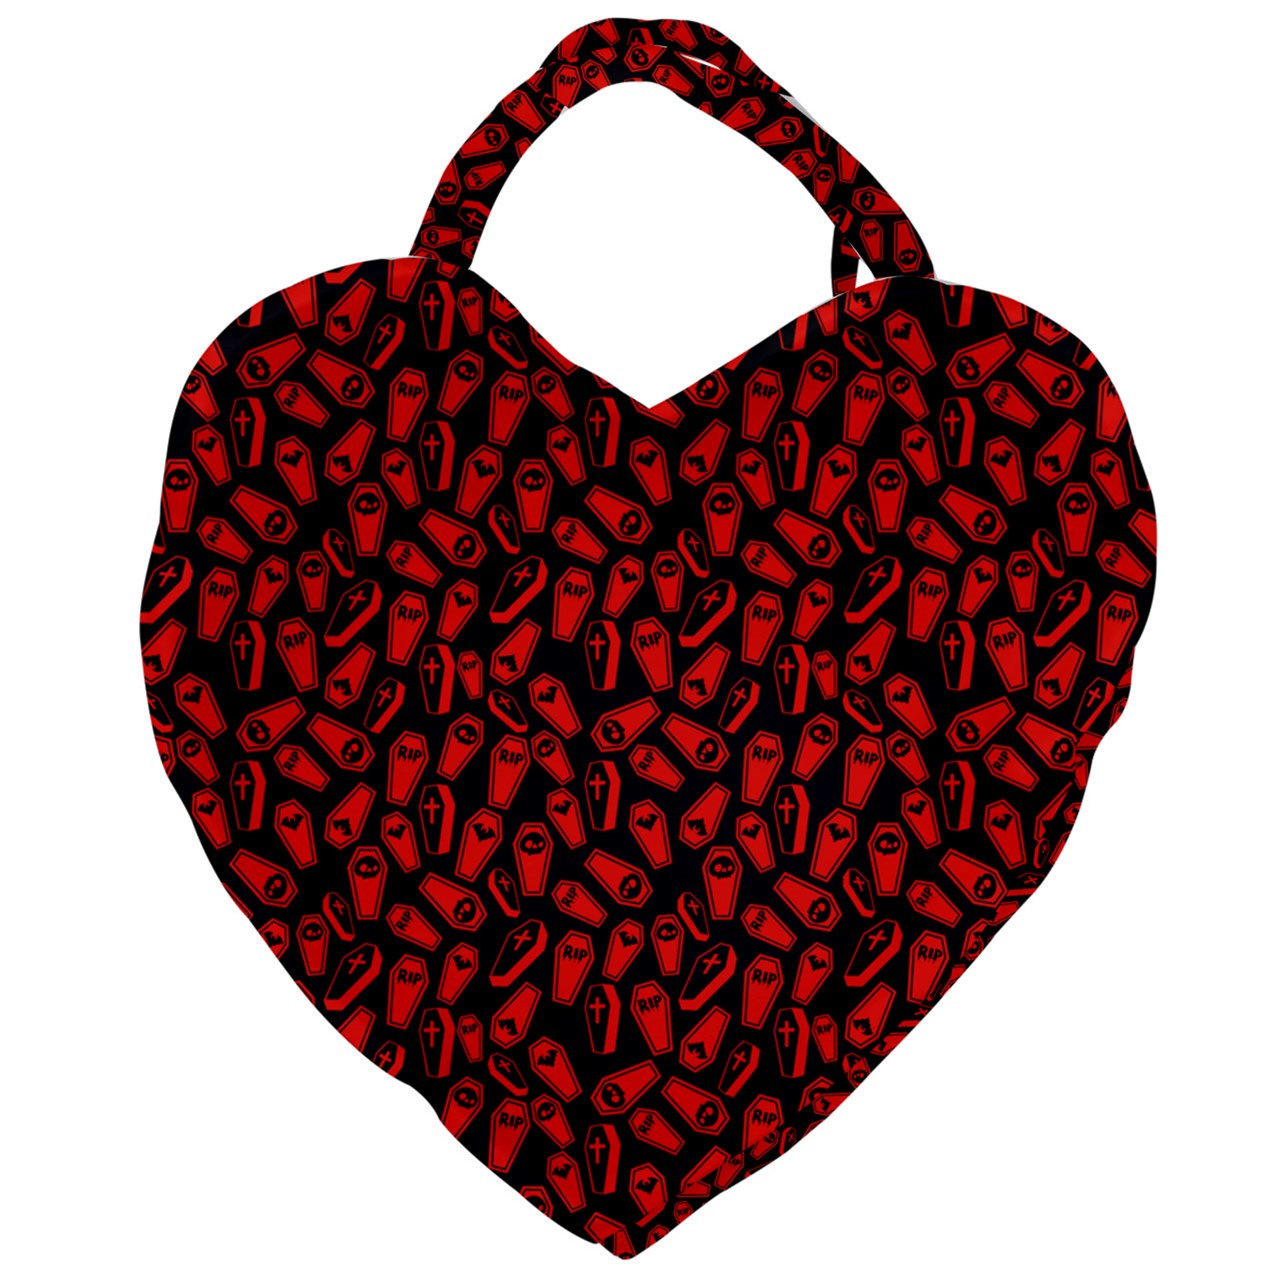 coffin black red Giant Heart Shaped Tote